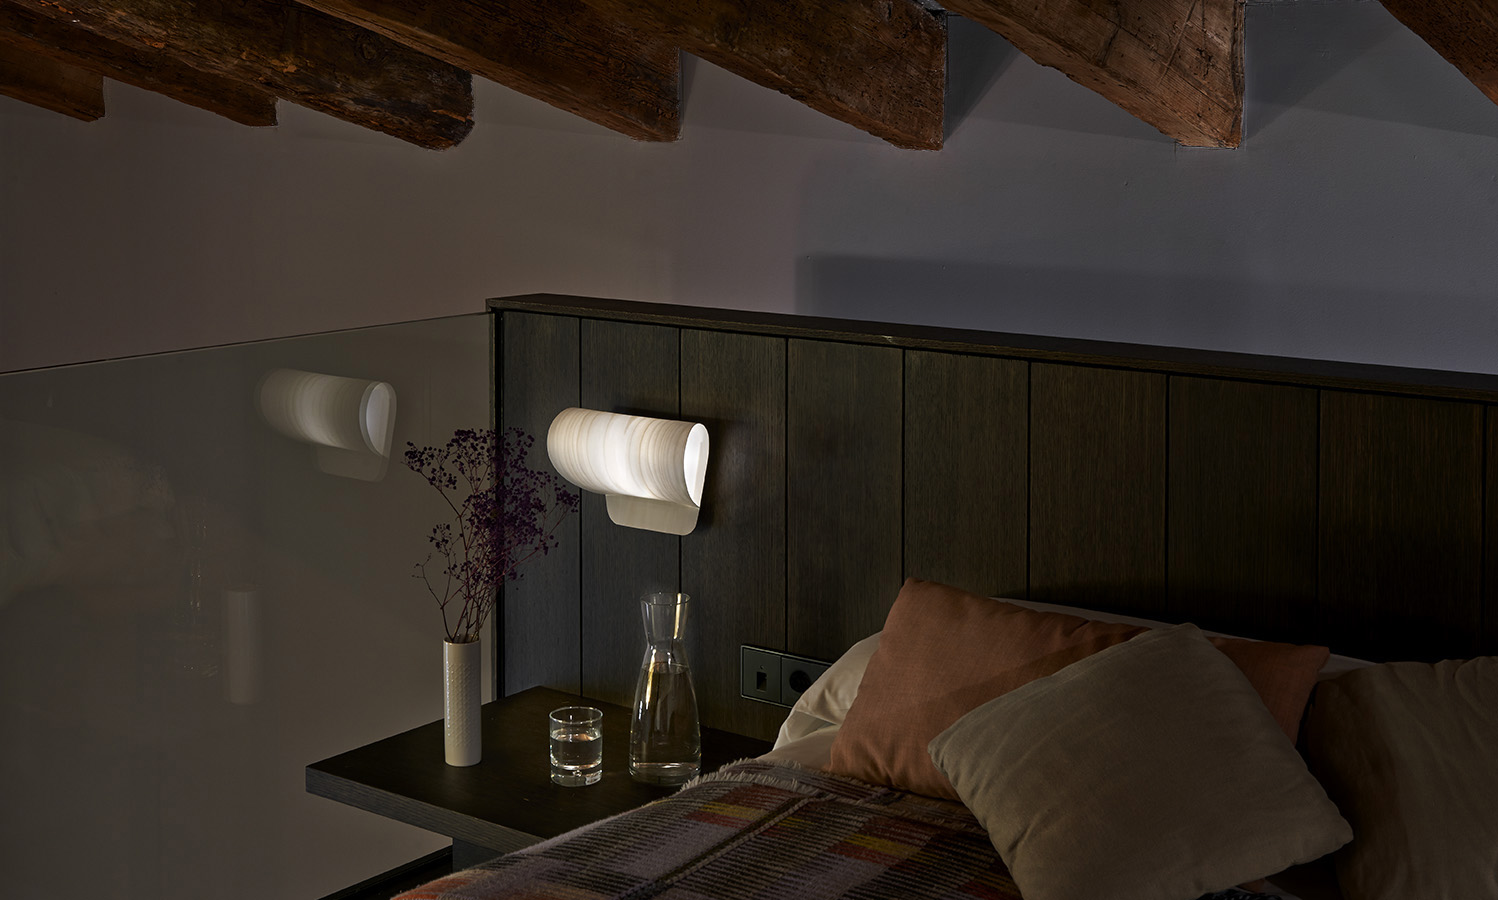 LZF Lamps | Pleg, Wall Lamp. Caro Hotel Room | Wood touched by Light | Handmade Wood Lighting since 1994